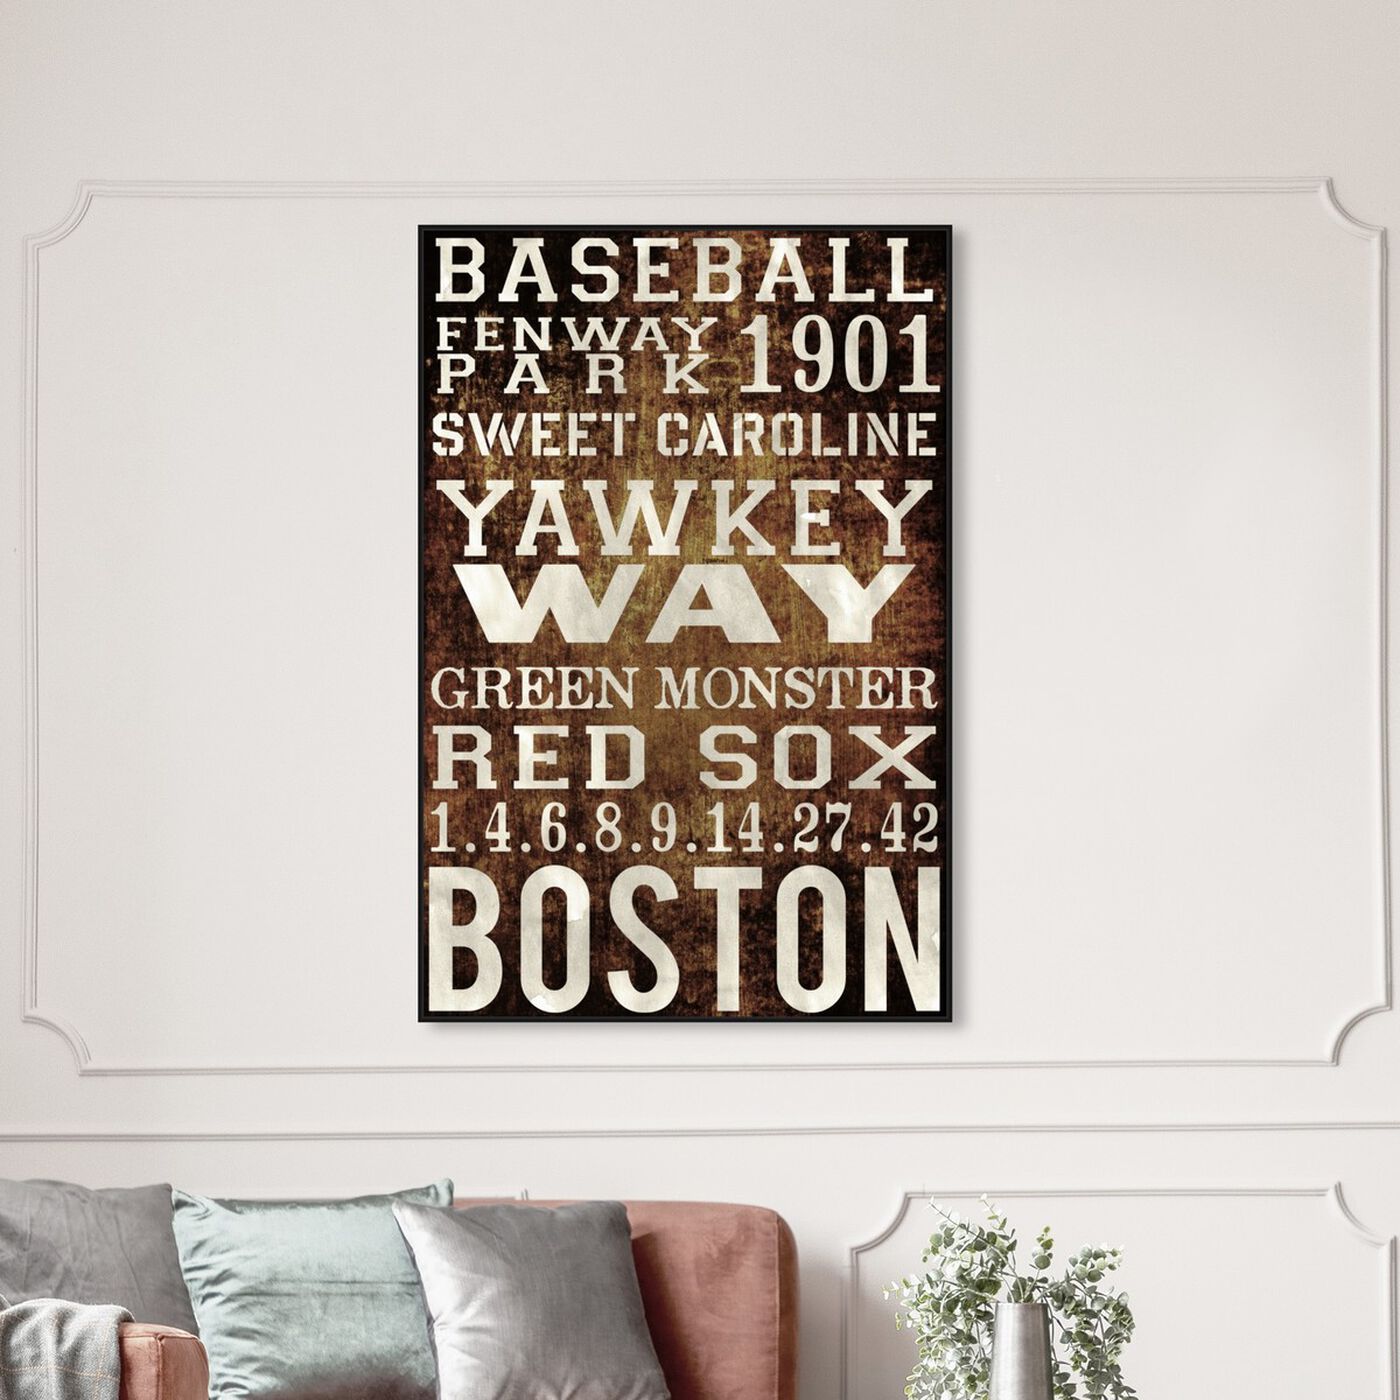 Hanging view of Boston Red Sox featuring advertising and publications art.